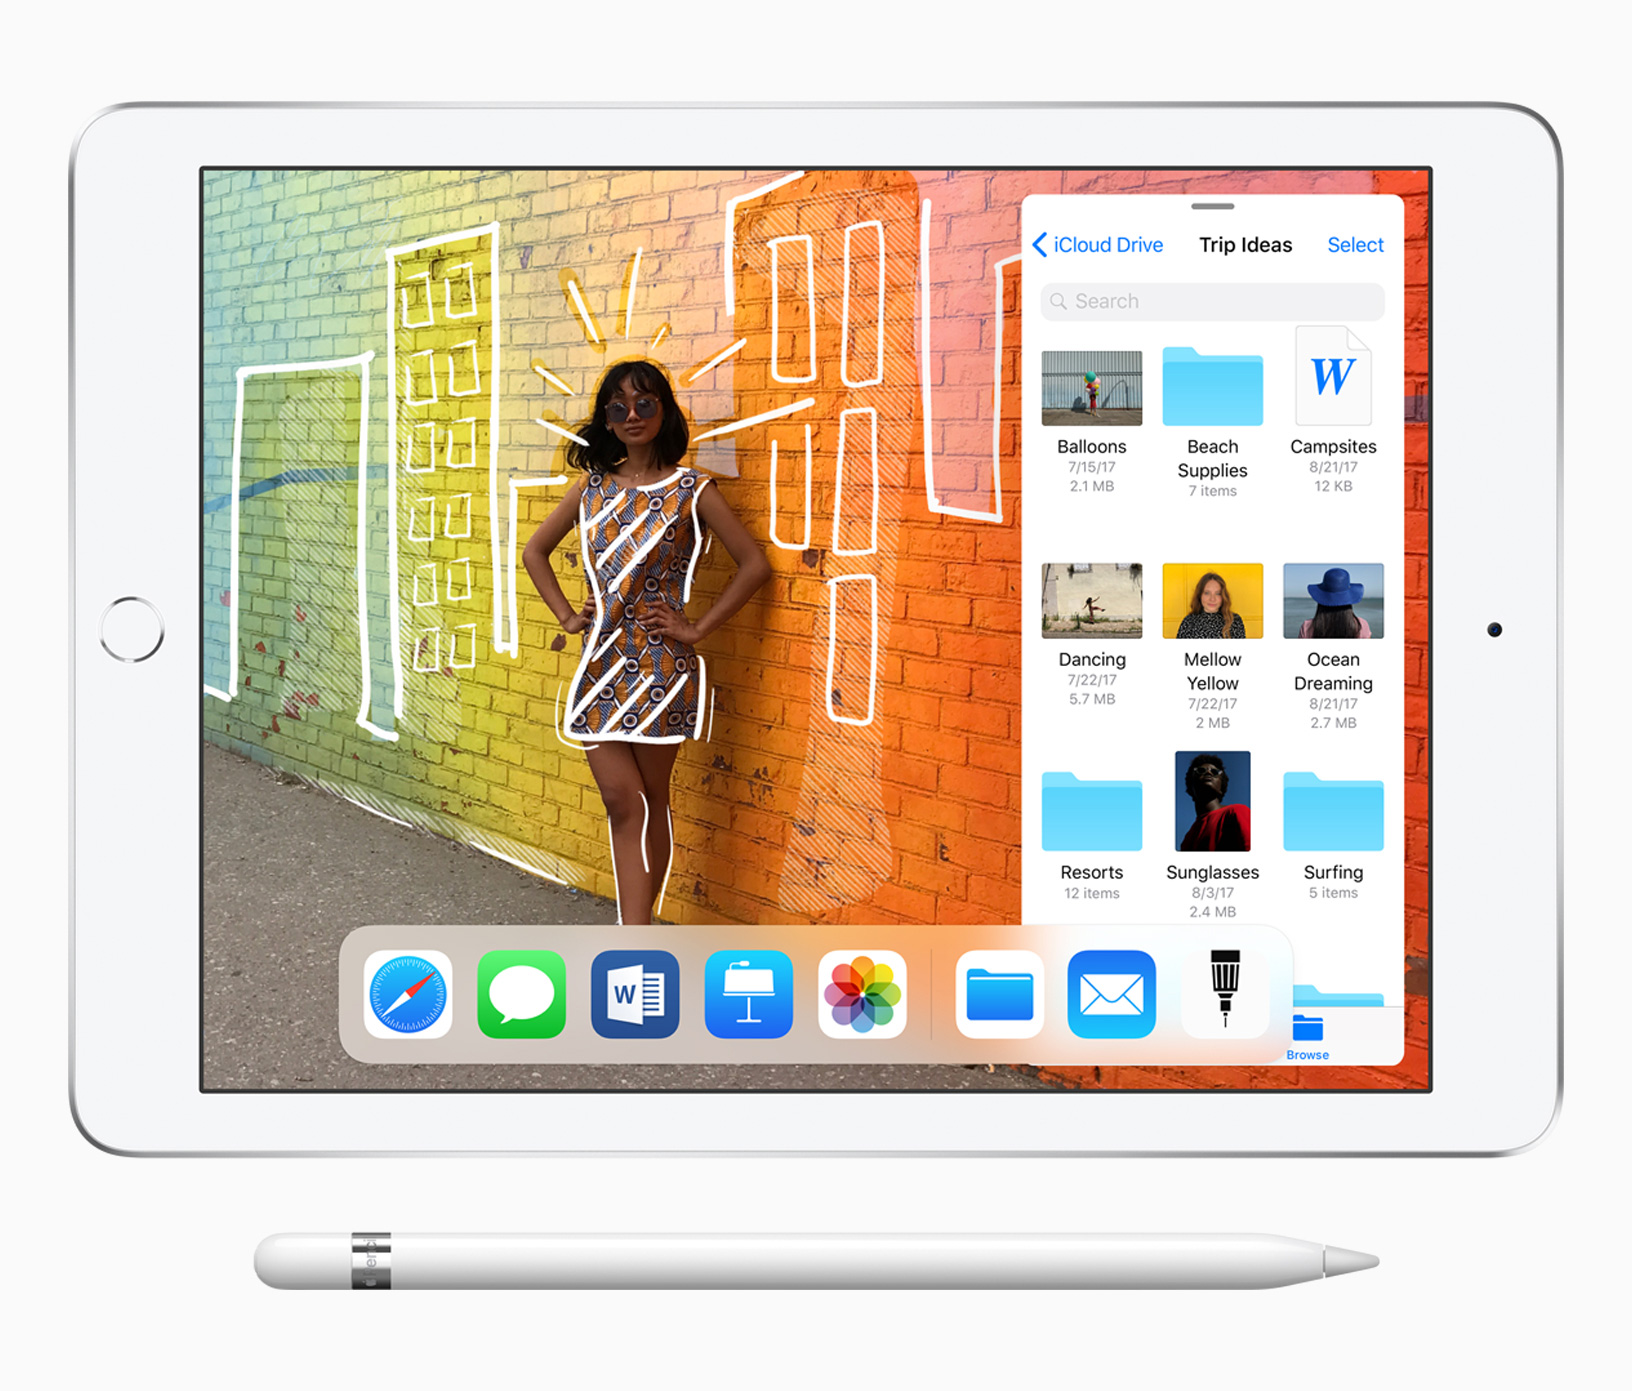 Apple introduces new $329 iPad with Pencil support